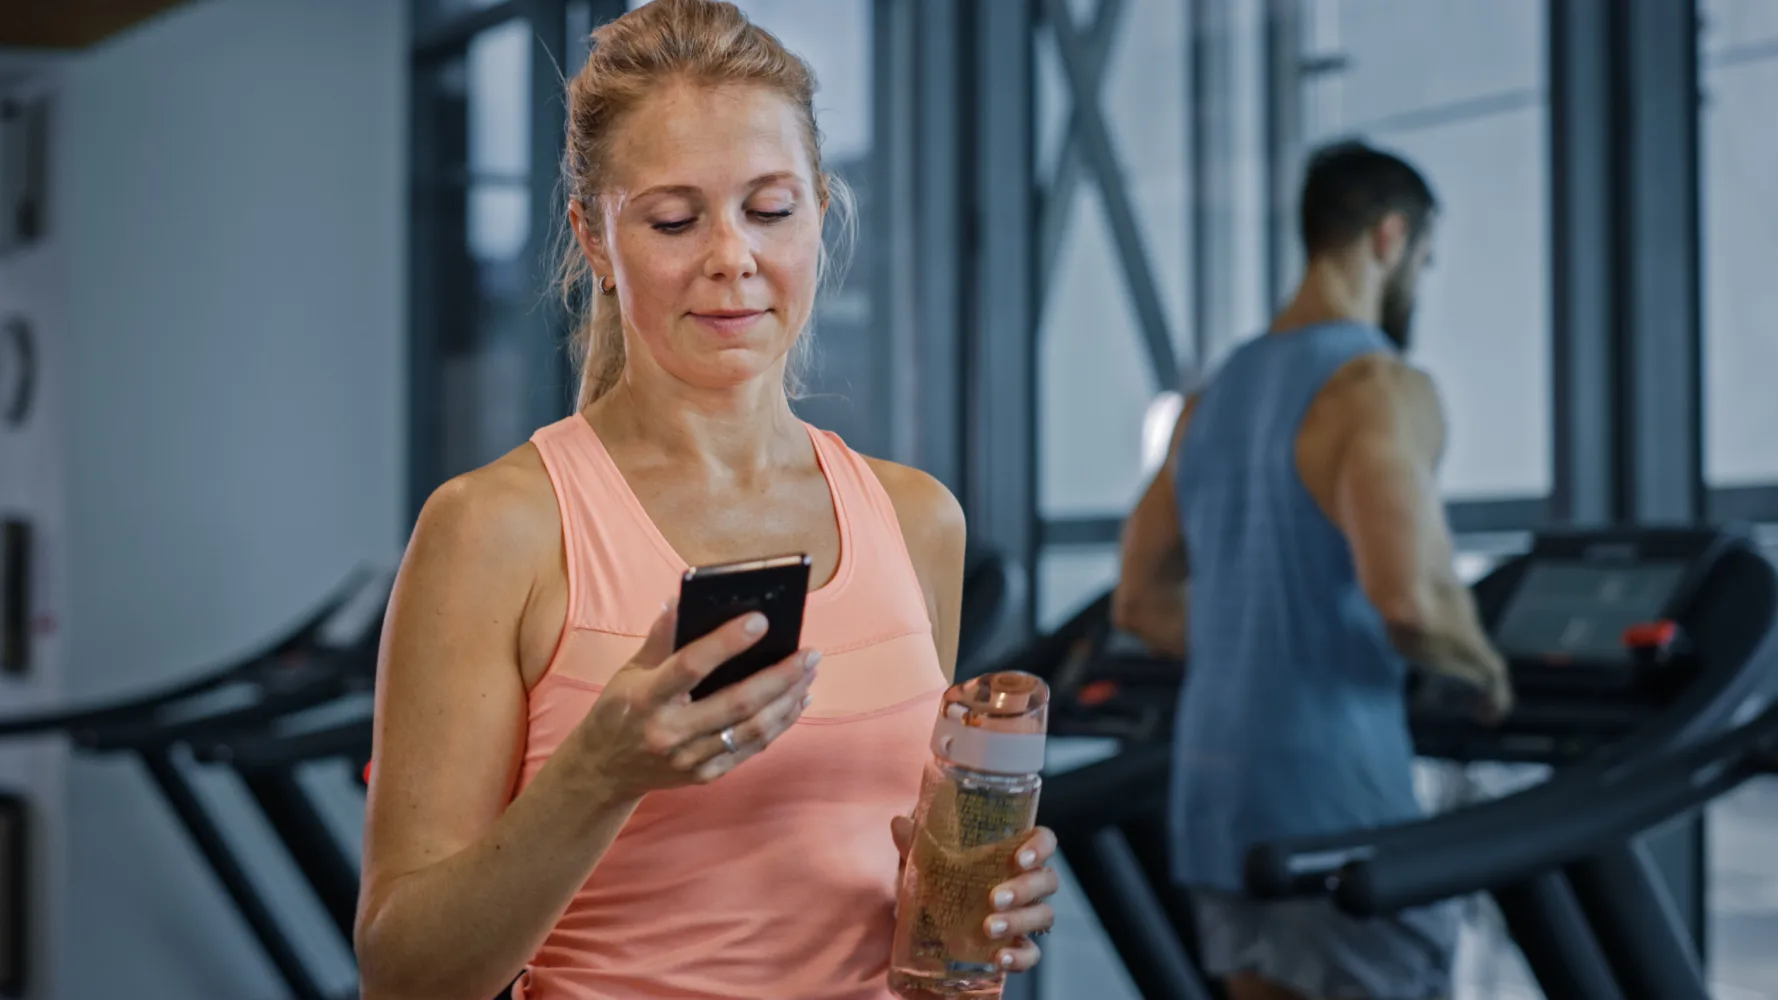 Gym Sends Automated SMS Message to Member